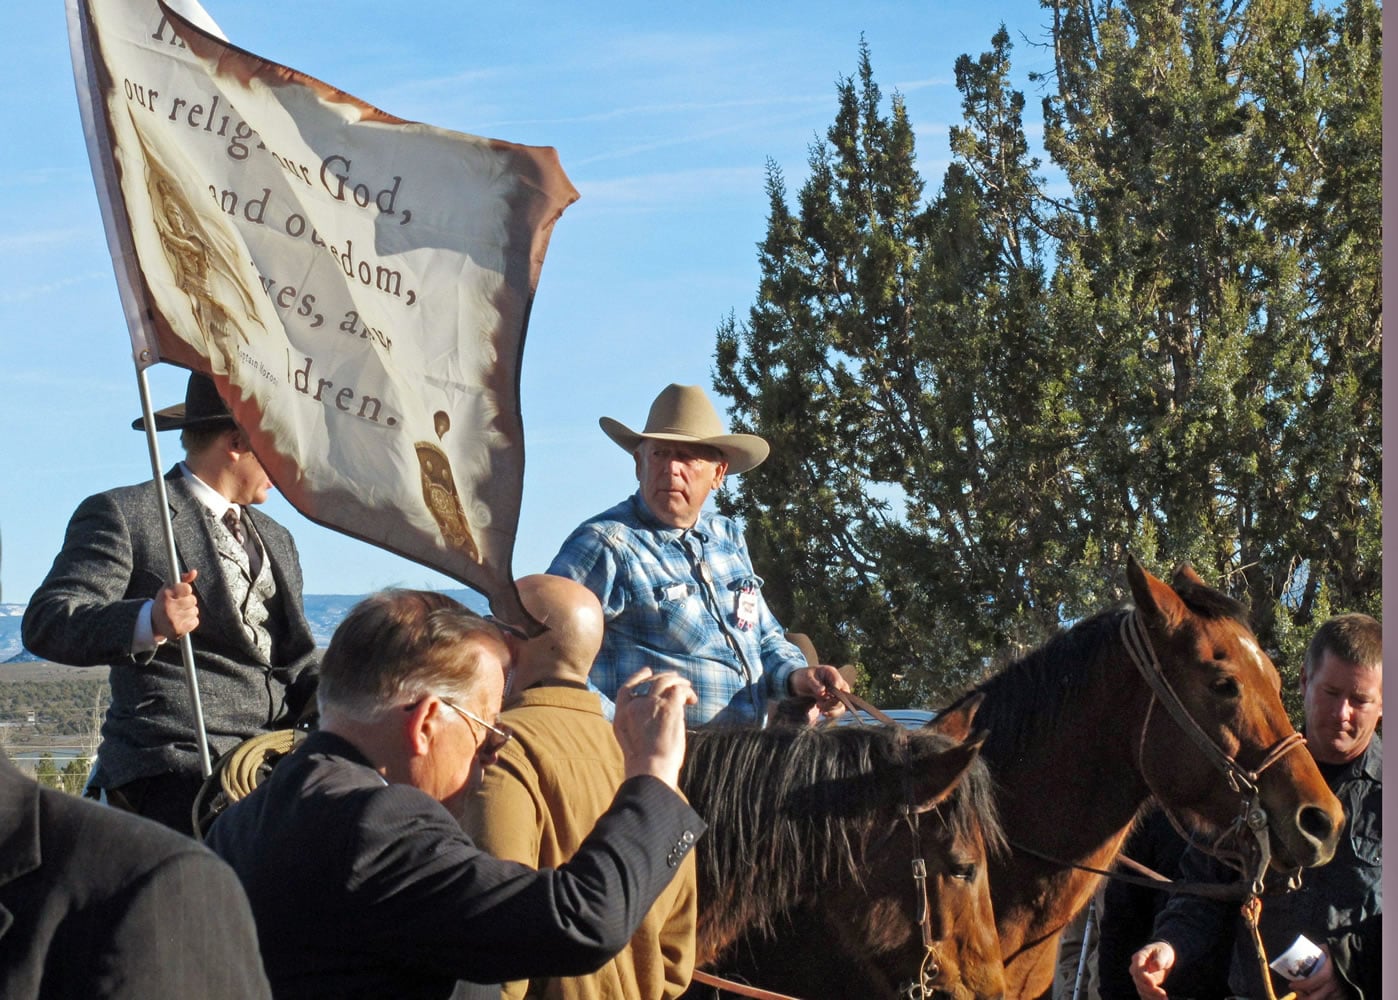 Cliven Bundy, on horseback at center, joins the funeral procession for Arizona rancher Robert "LaVoy" Finicum in Kanab, Utah, on  Feb. 5. Hundreds of people packed a Mormon church in rural Utah for the viewing ceremony for the fallen spokesman of the Oregon armed standoff. Police shot and killed Finicum during a Jan. 26 traffic stop after they say he reached for a gun.